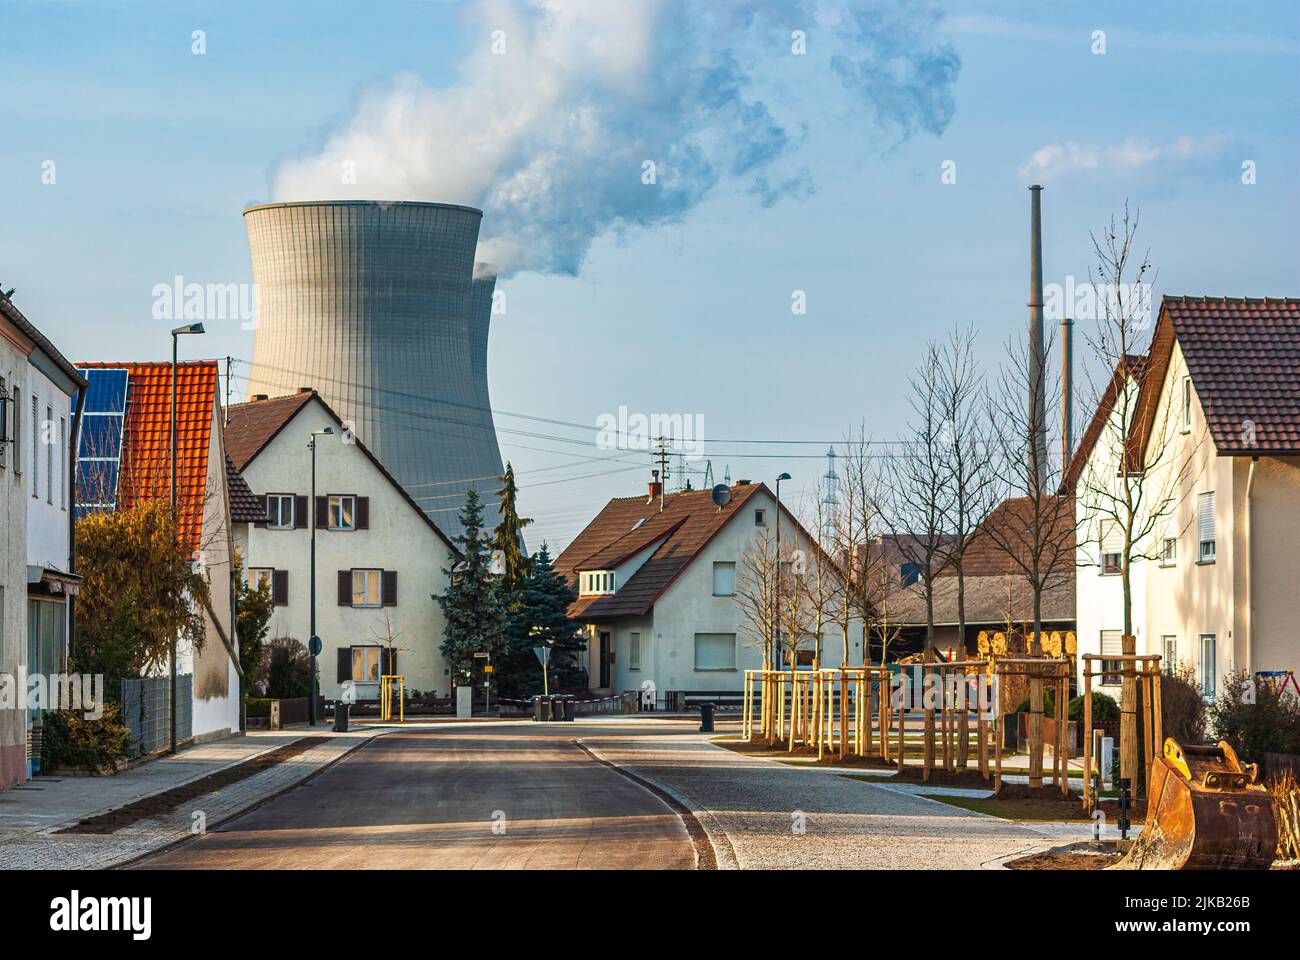 Gundremmingen, Bavaria, Germany - March 25, 2011: The village and nuclear power plant of Gundremmingen in the administrative district of Swabia. Stock Photo